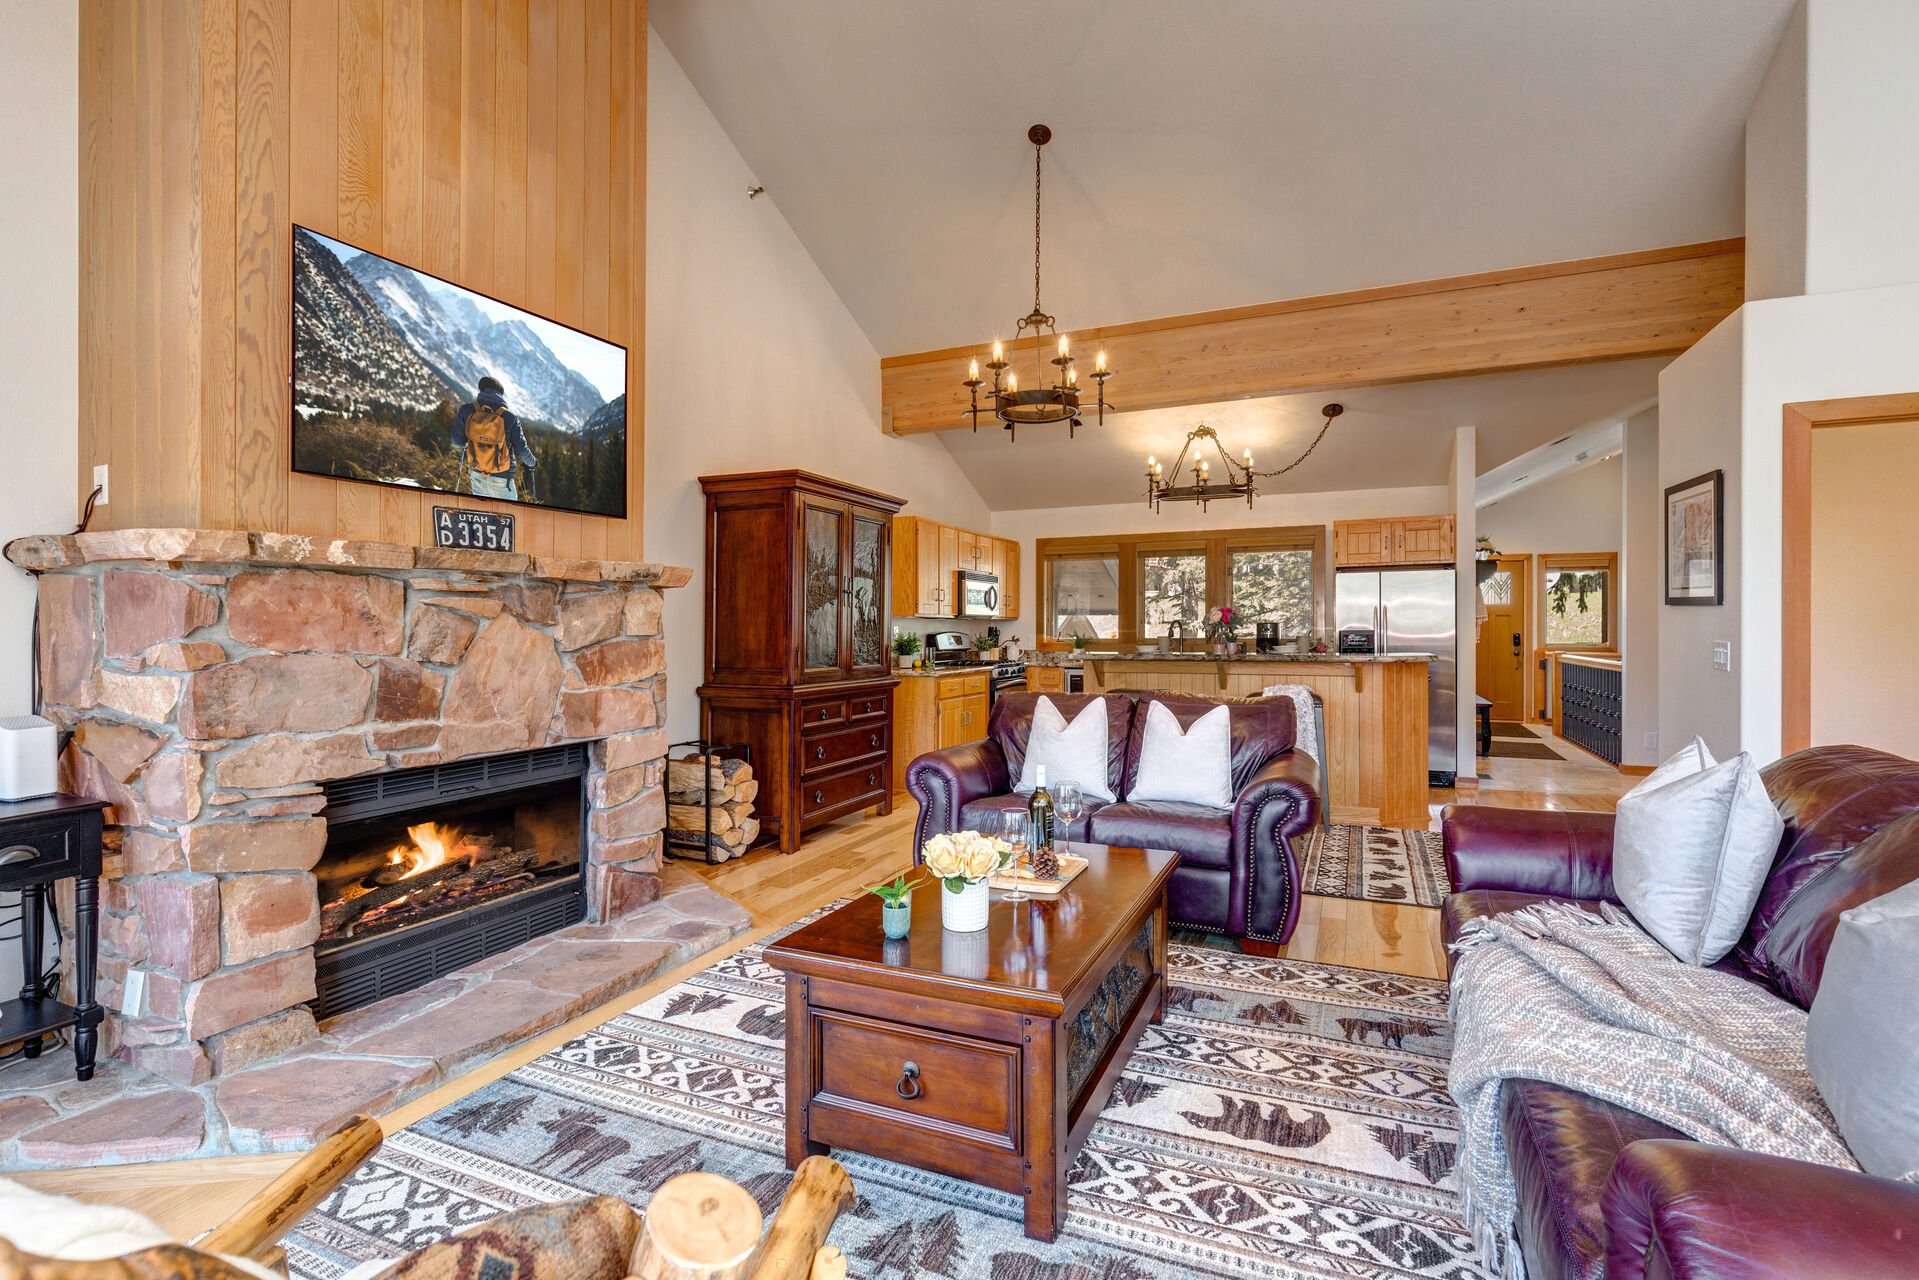 Living Room with plush leather furnishings, gas-assist fireplace, queen-sized Murphy Bed, vaulted ceilings, LG smart tv, and private deck access